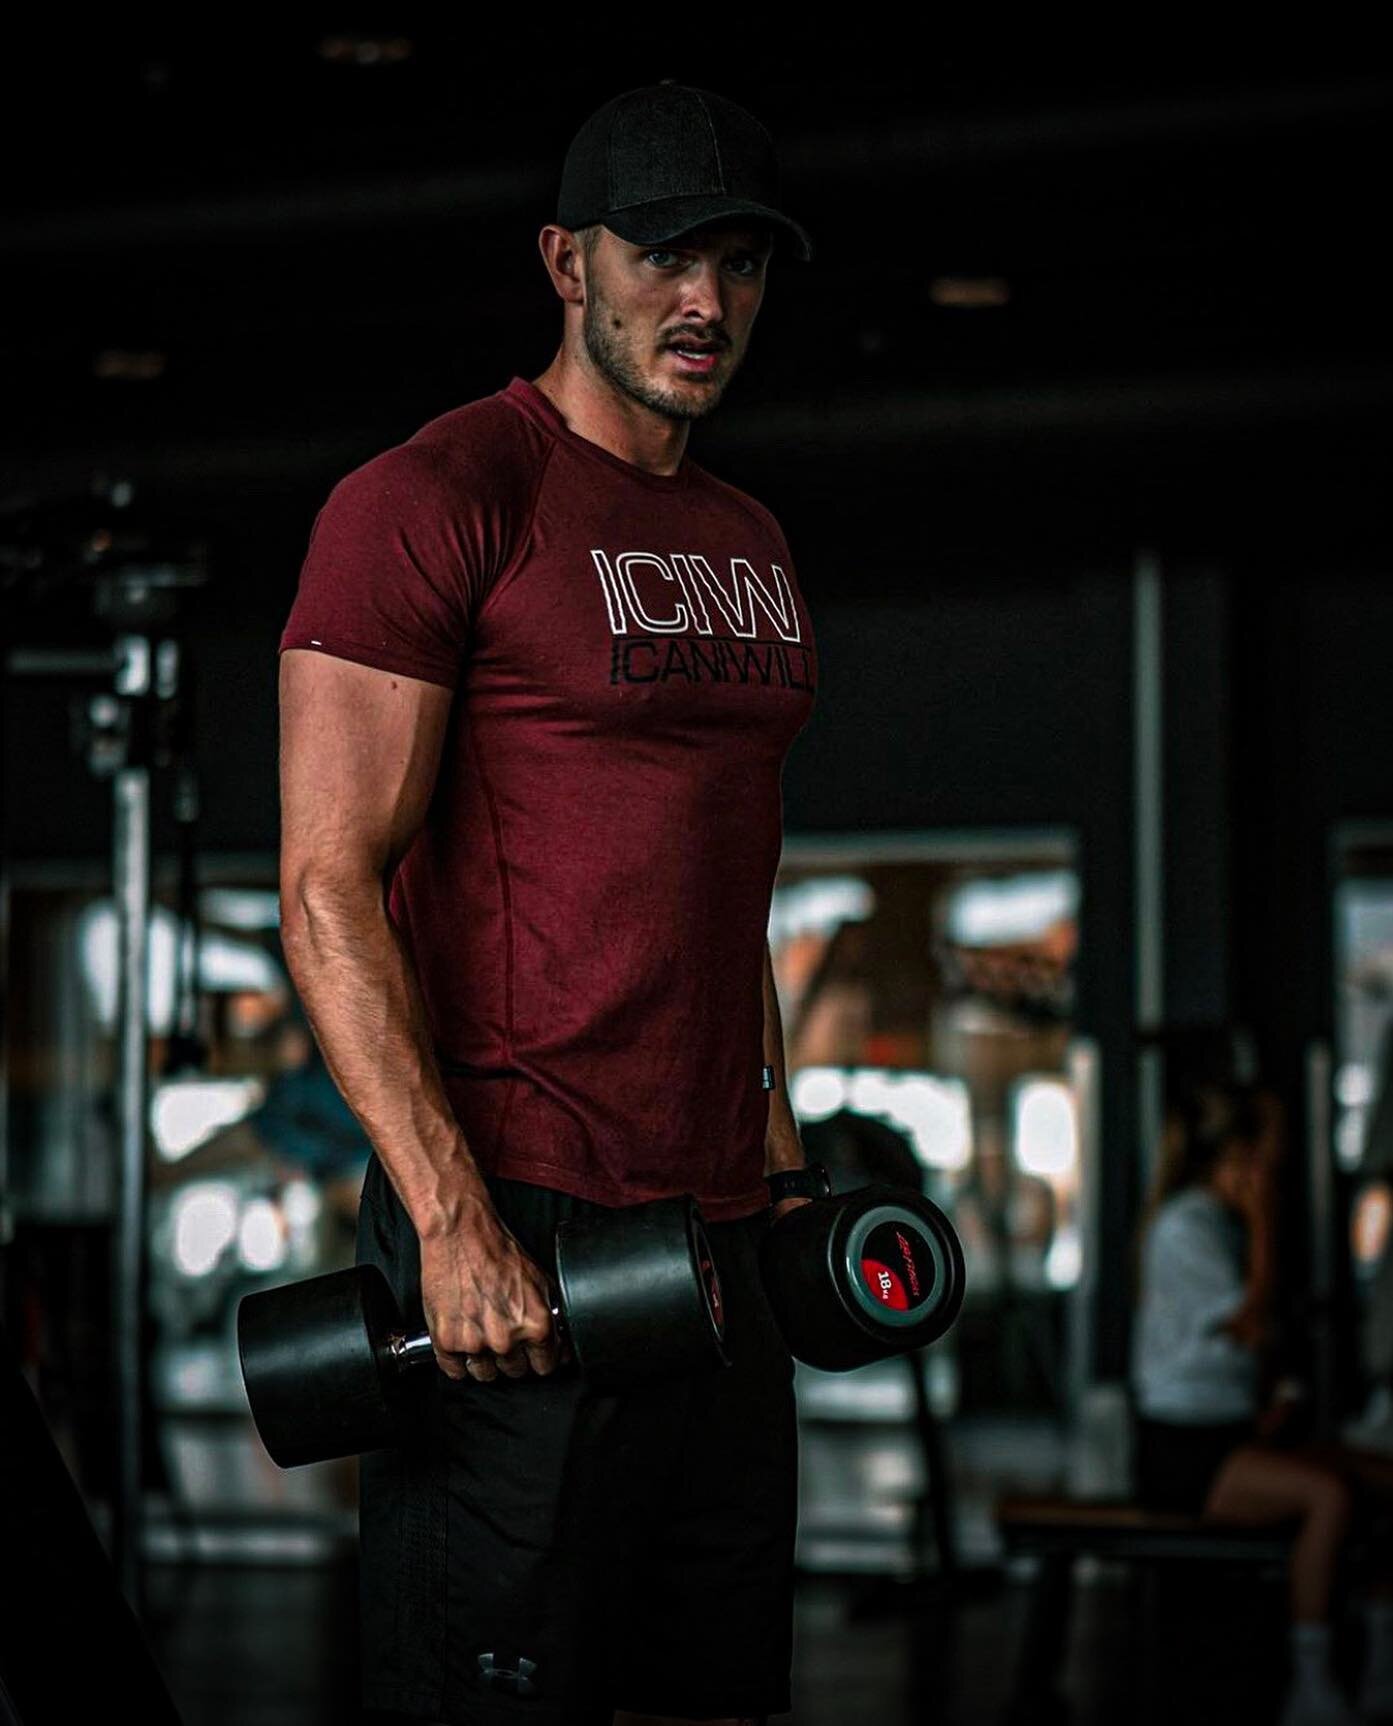 Both our sport and baseball model fit well to workout with💪🏼
📷: @ptkokken